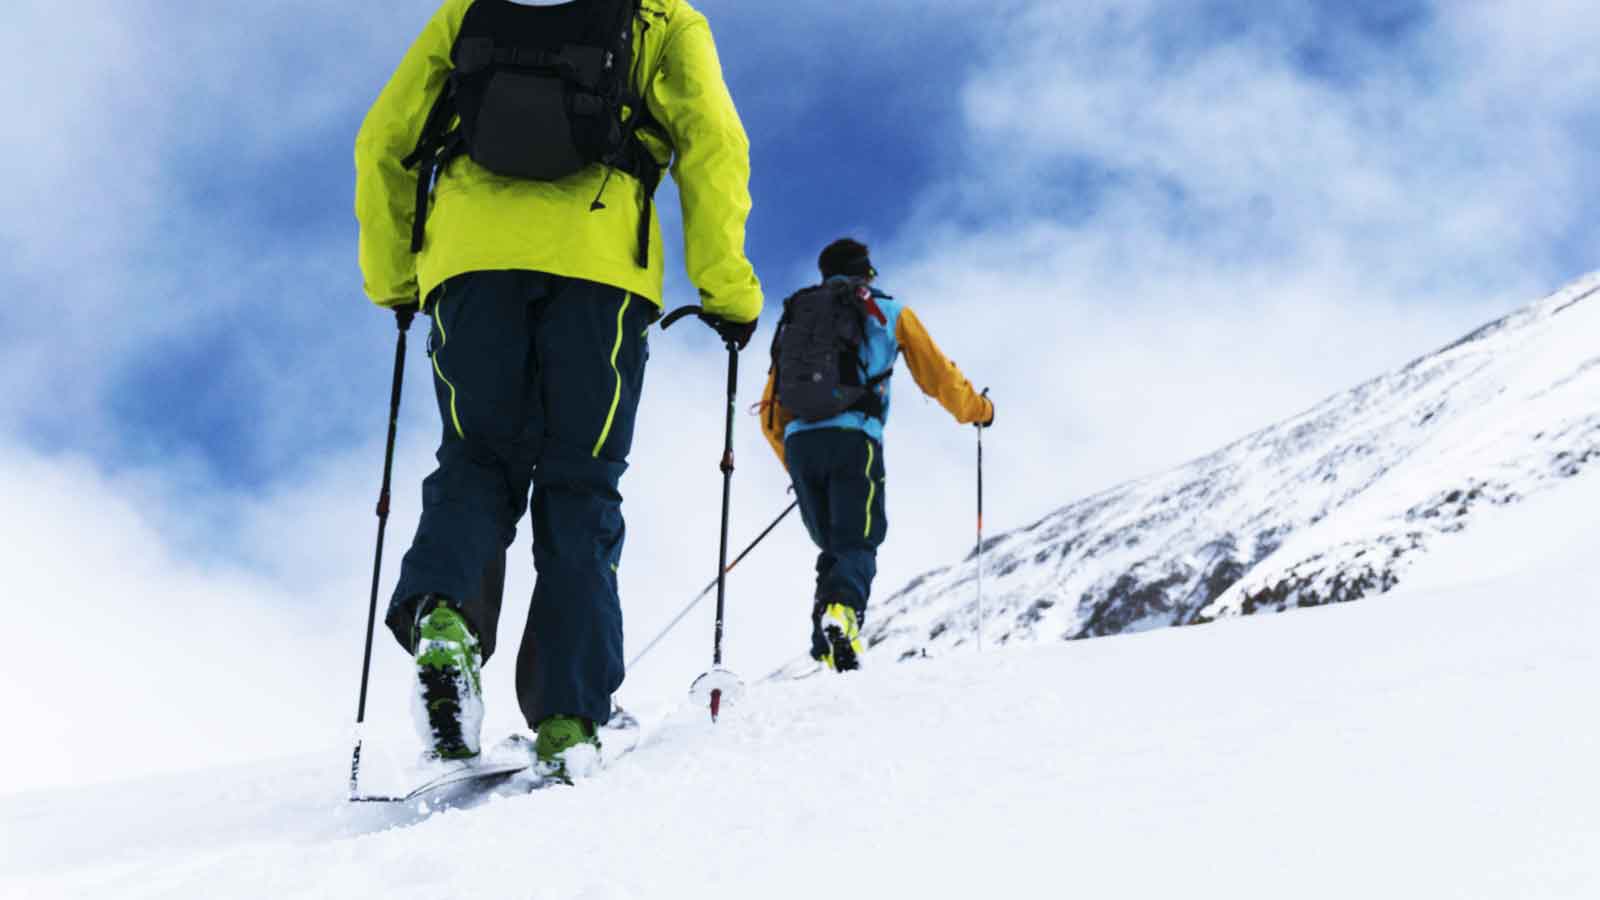 ski touring boots for wide feet